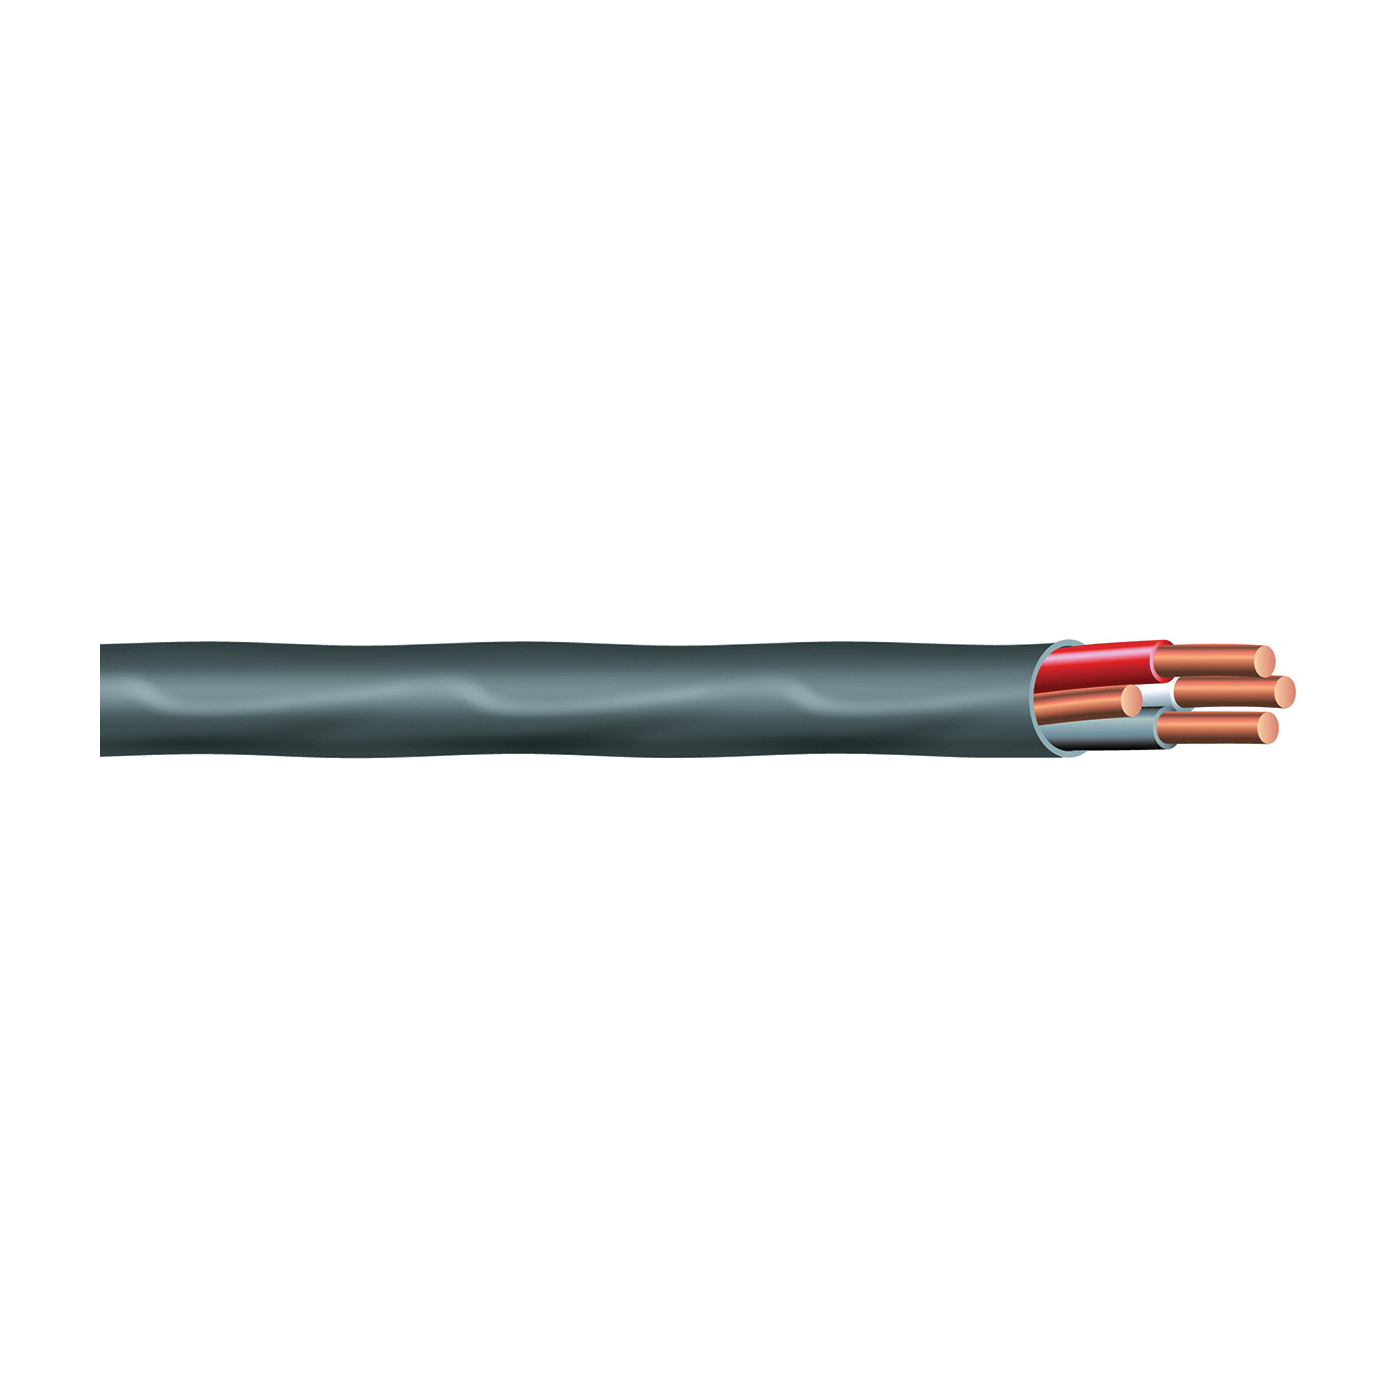 63949232 Sheathed Cable, 8 AWG Wire, 3 -Conductor, 50 ft L, Copper Conductor, PVC Insulation